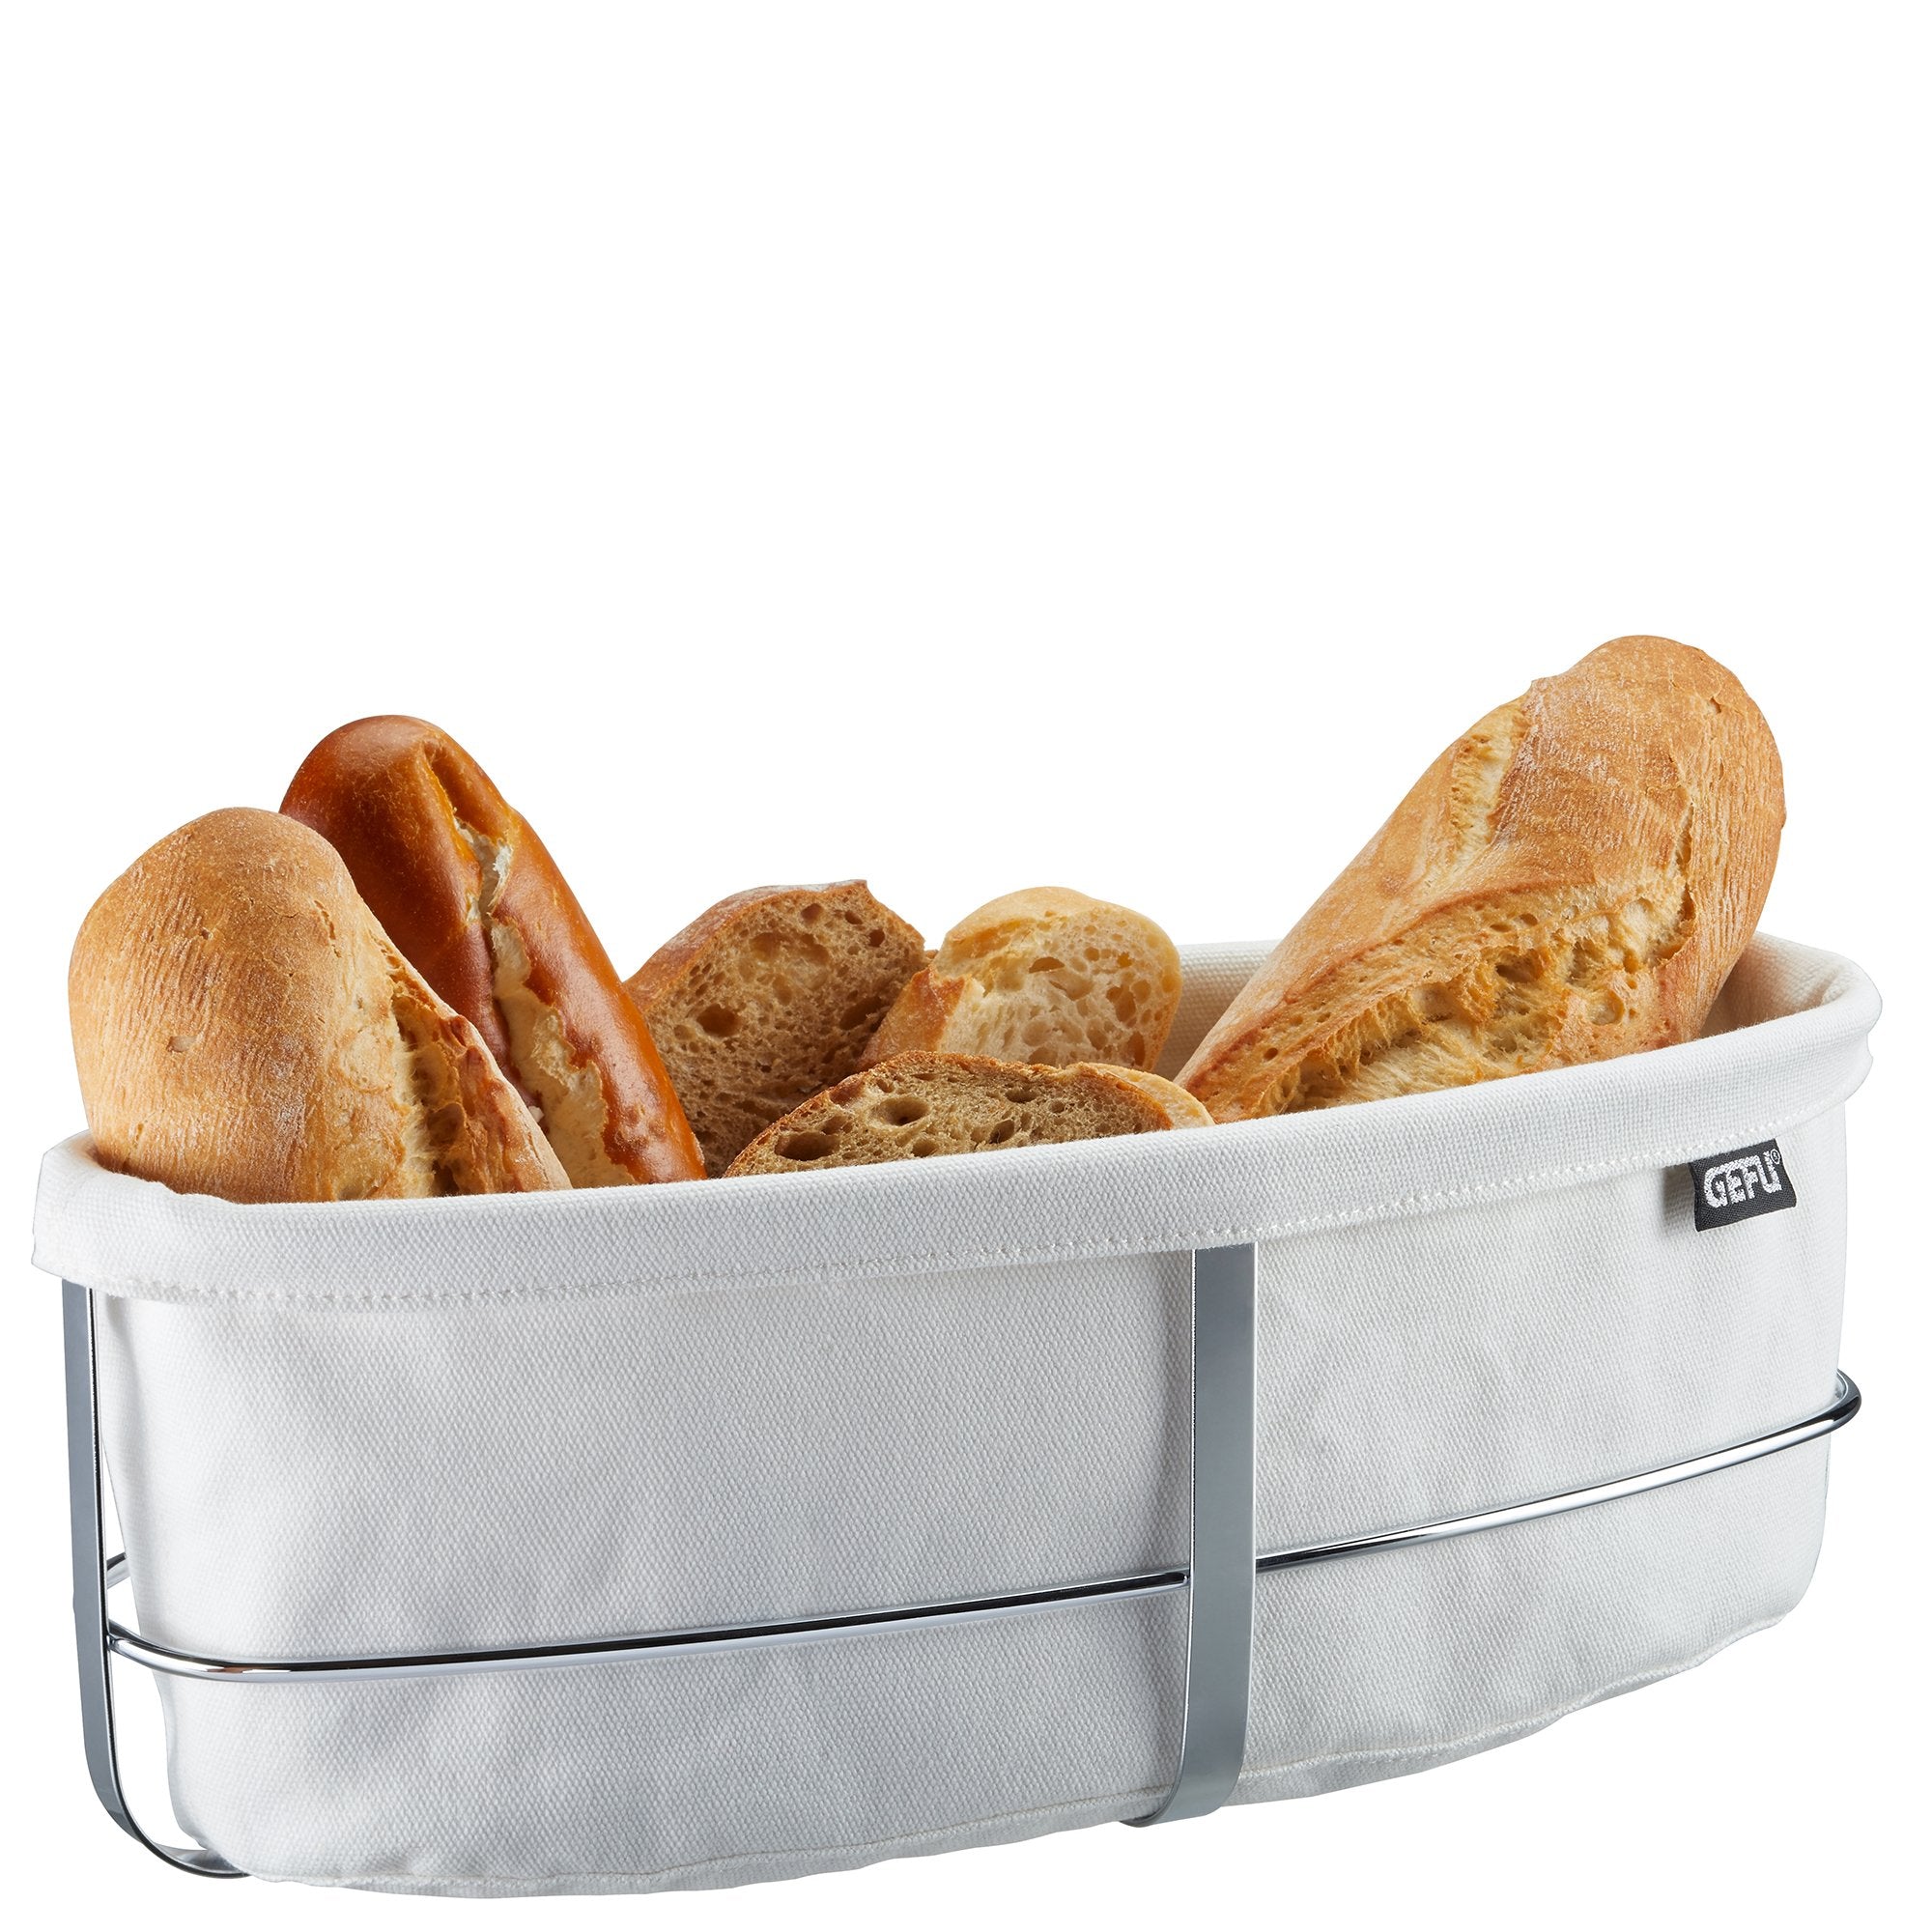 GEFU Bread Basket Brunch, Oval White - Whole and All